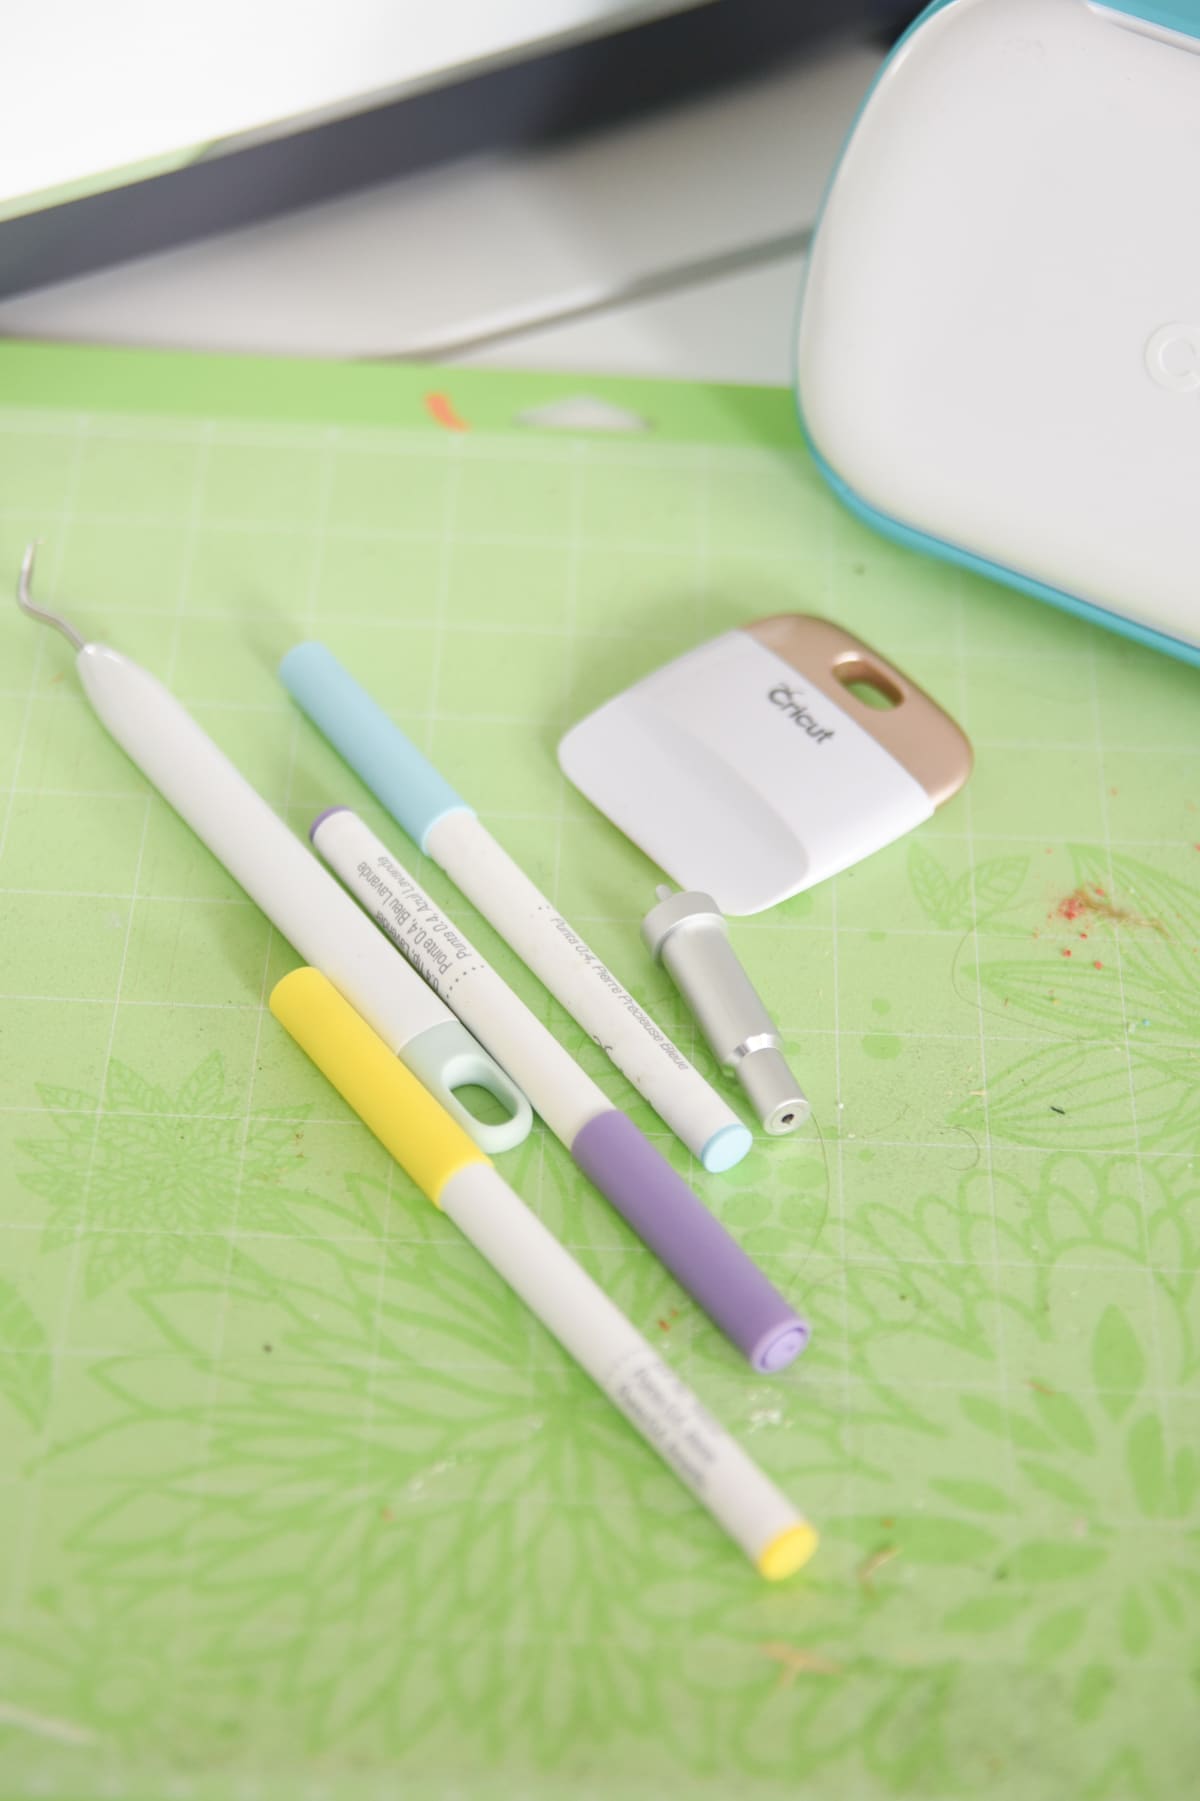 Best Cricut Accessories and Attachments - Clarks Condensed